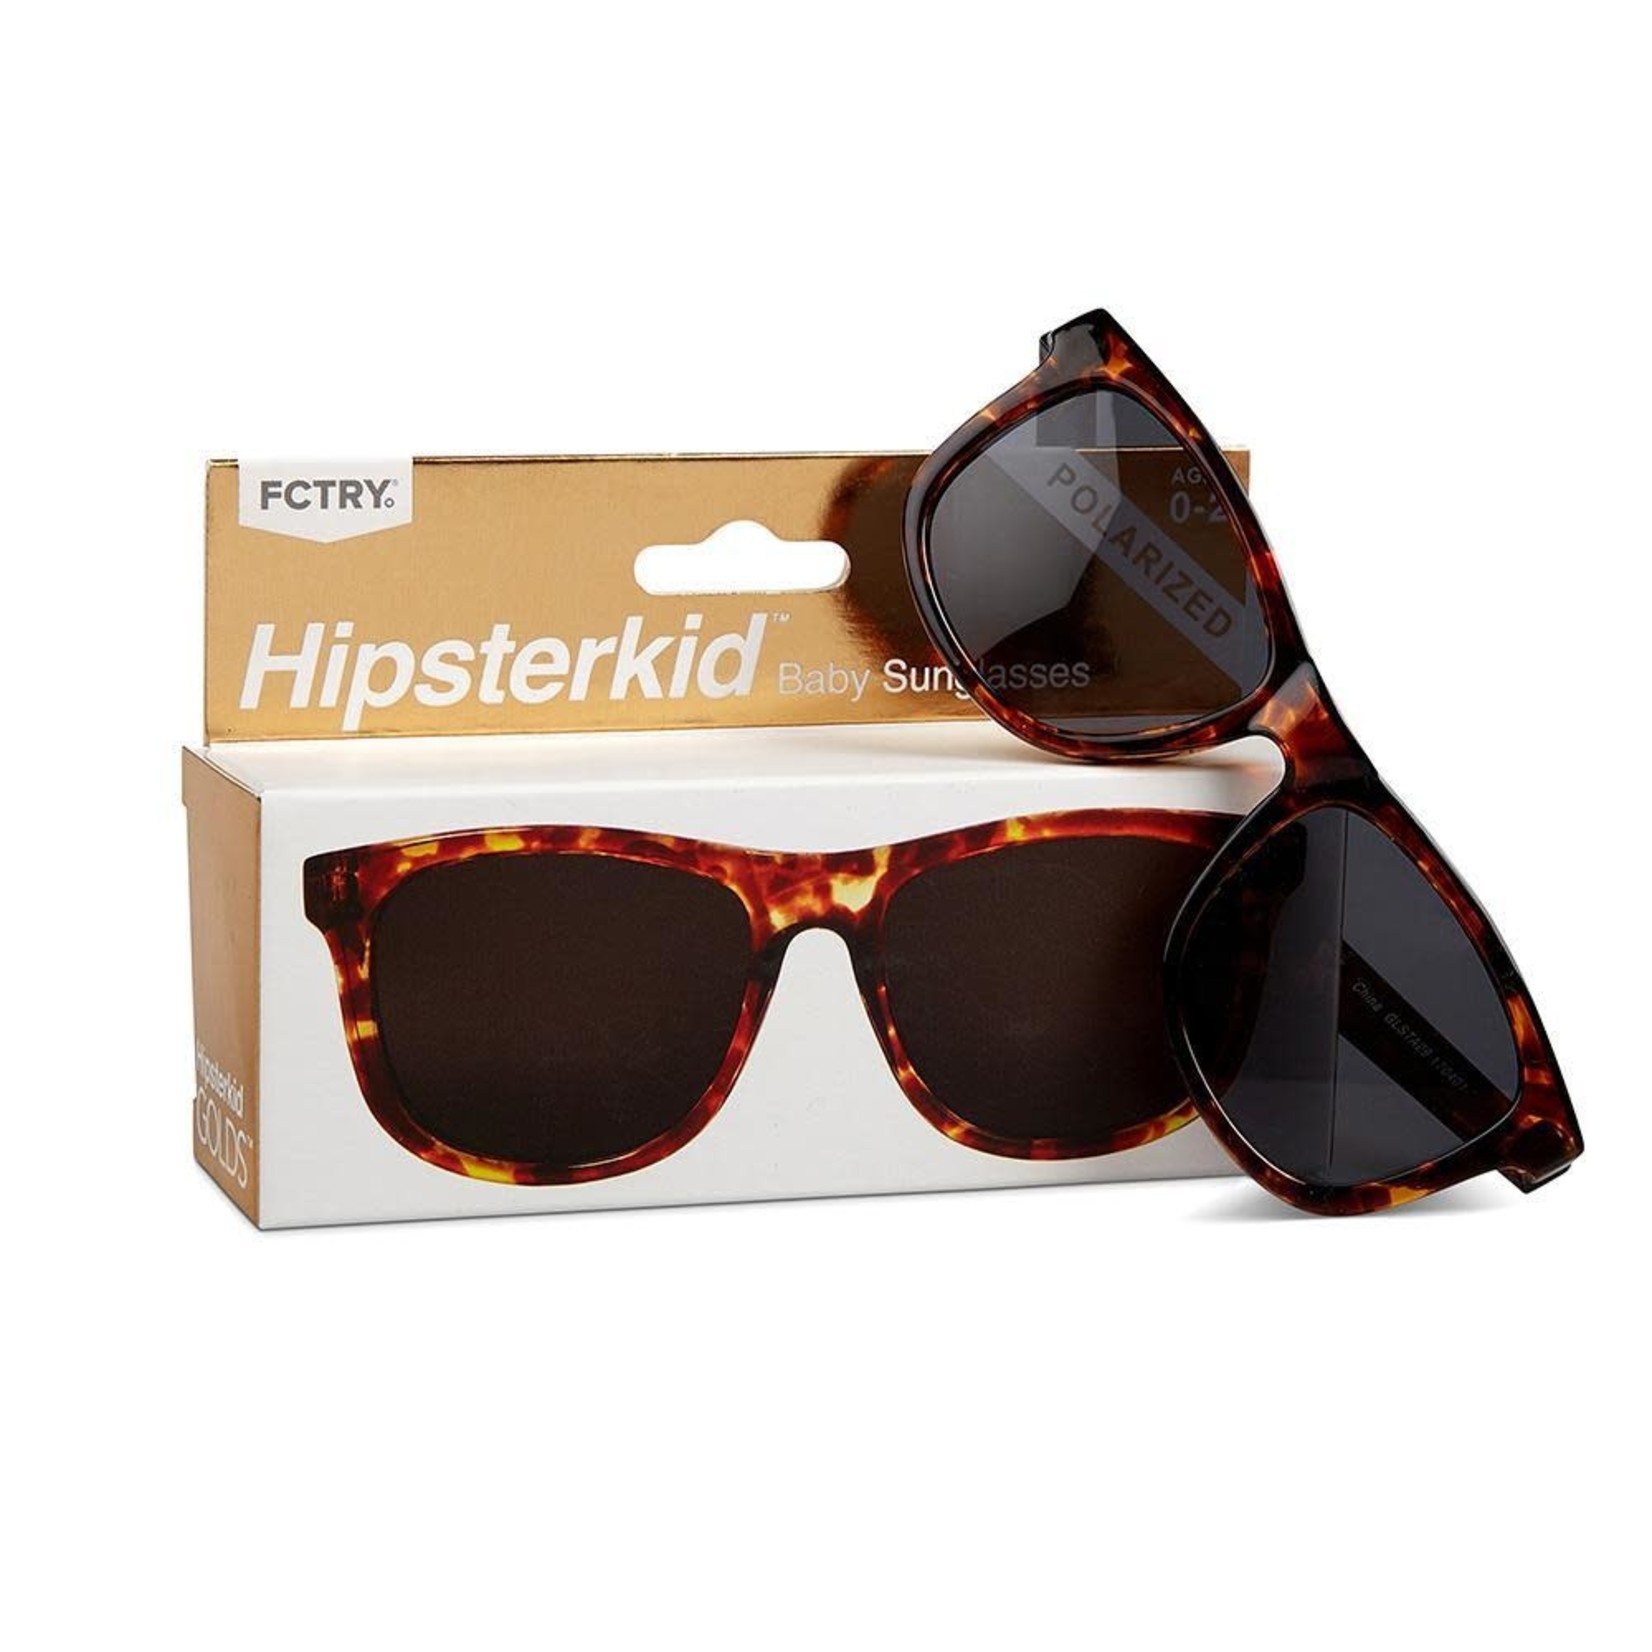 Hipsterkid Hipsterkid Golds Baby Sunglasses, Tortoise (0-2y)